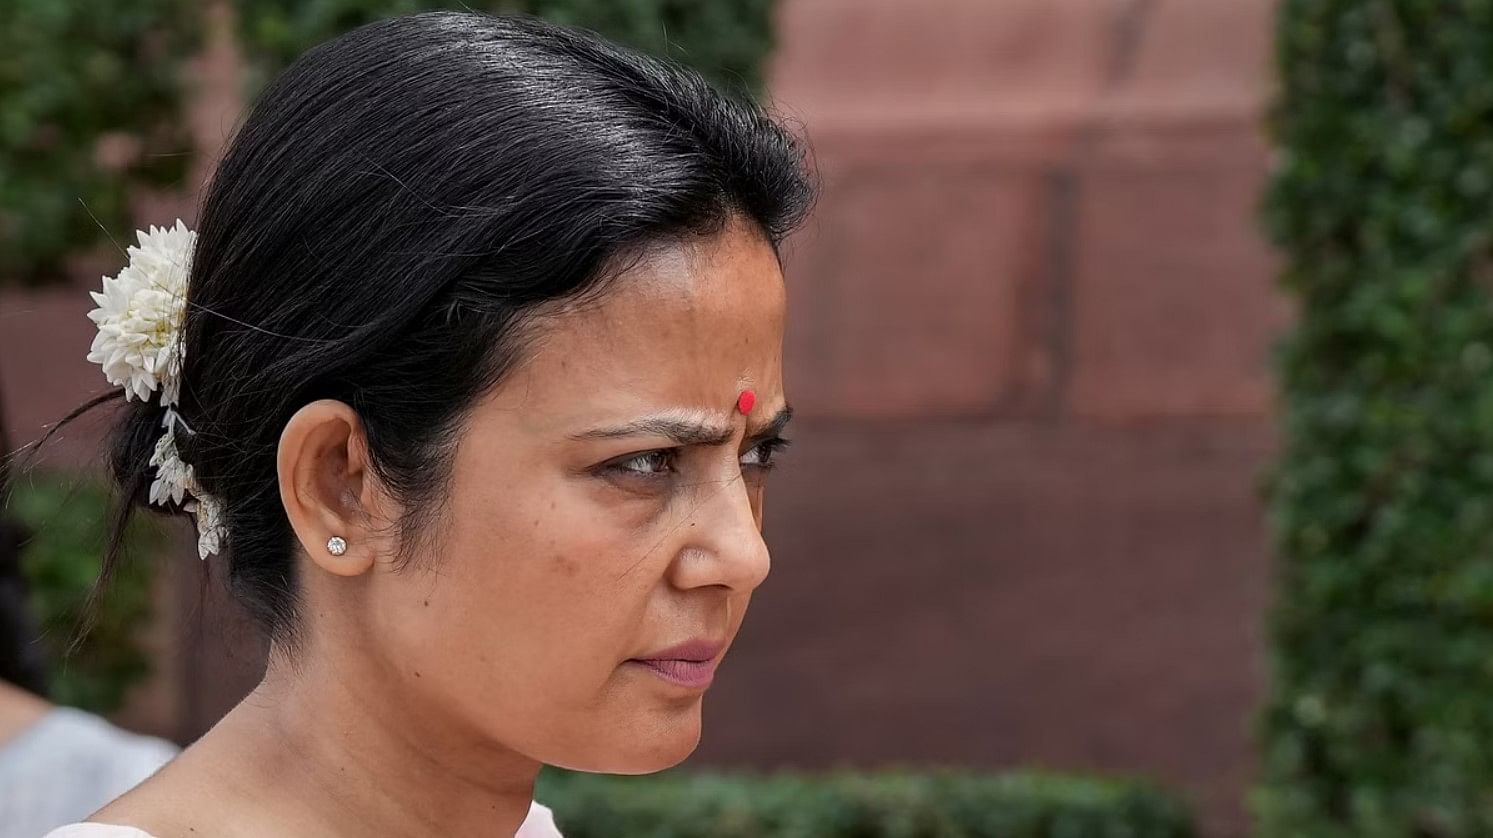 TMC MP Mahua Moitra Expelled from Lok Sabha: What Did Ethics Panel Report Say?